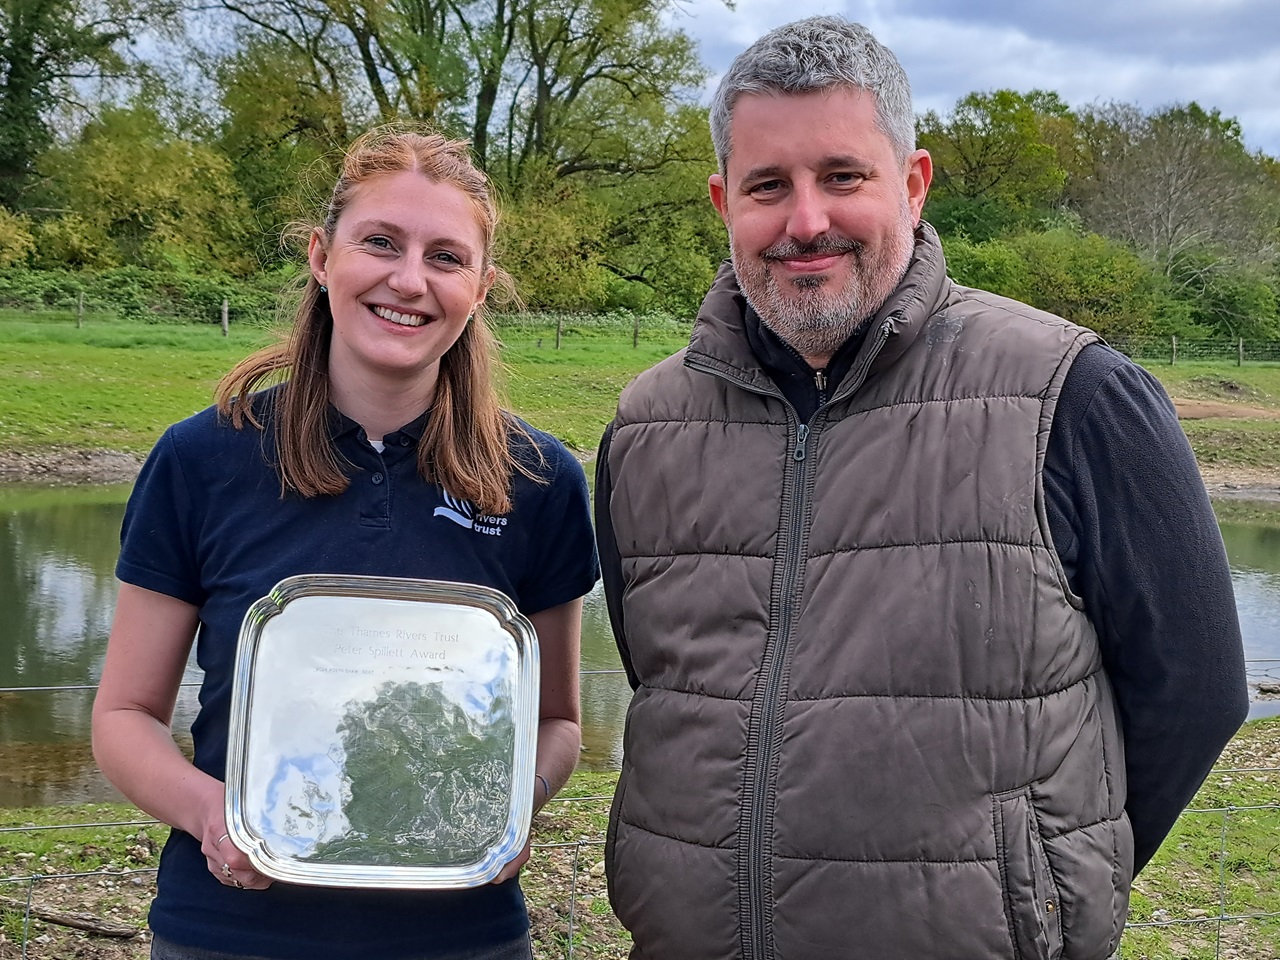 Education officer receives Thames Rivers Trust award